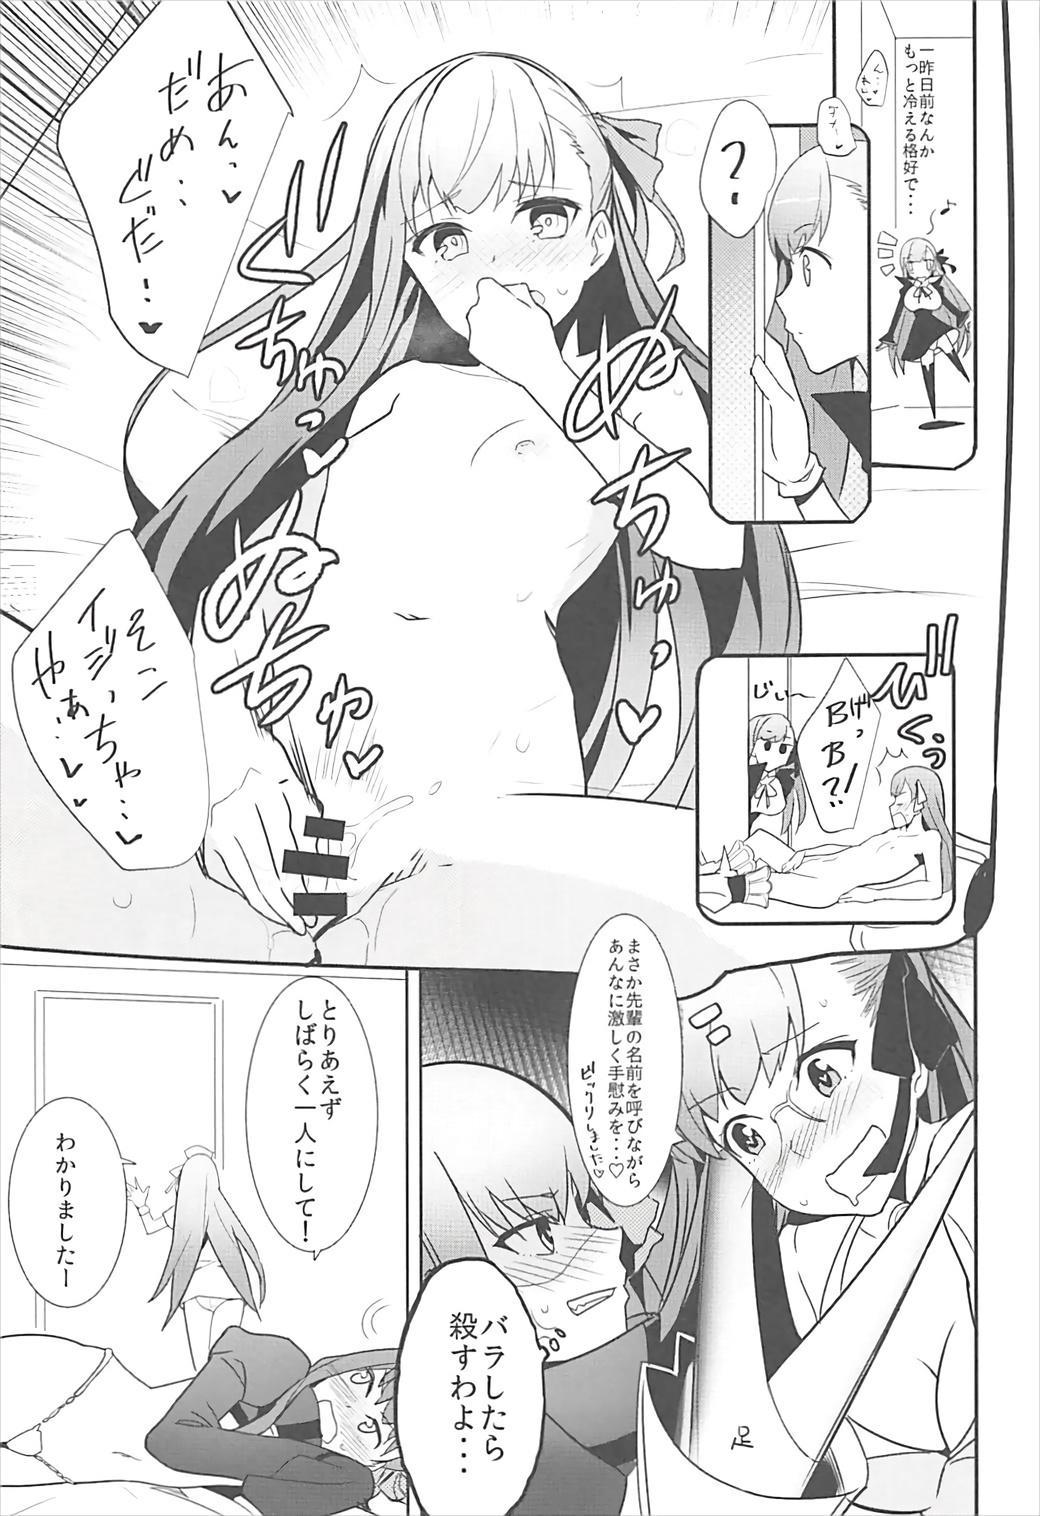 Porn In the Passion Melty heart.2 - Fate grand order Putaria - Page 6